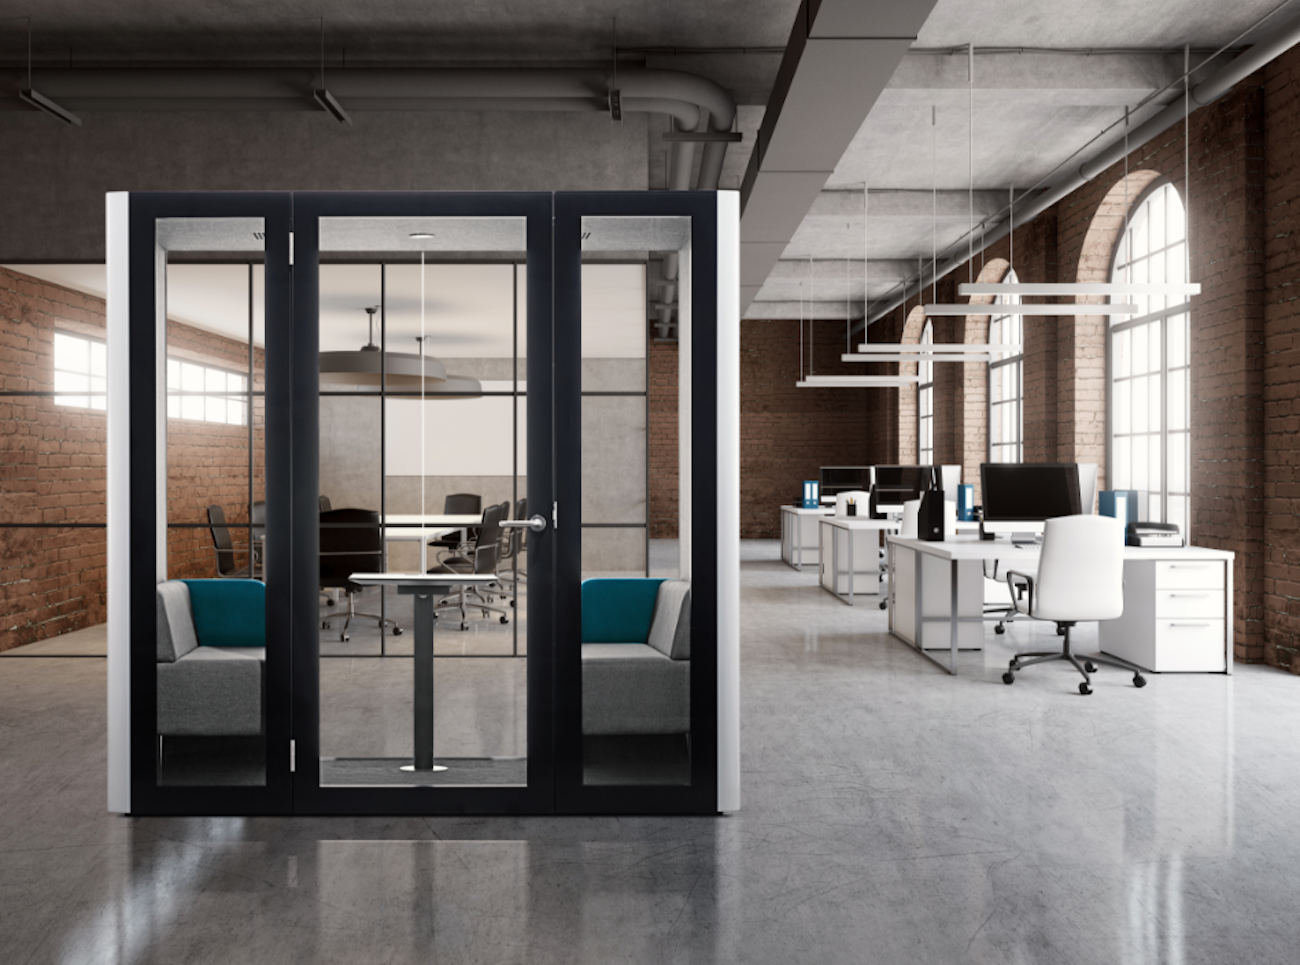 How does work organization change with an office acoustic pod?